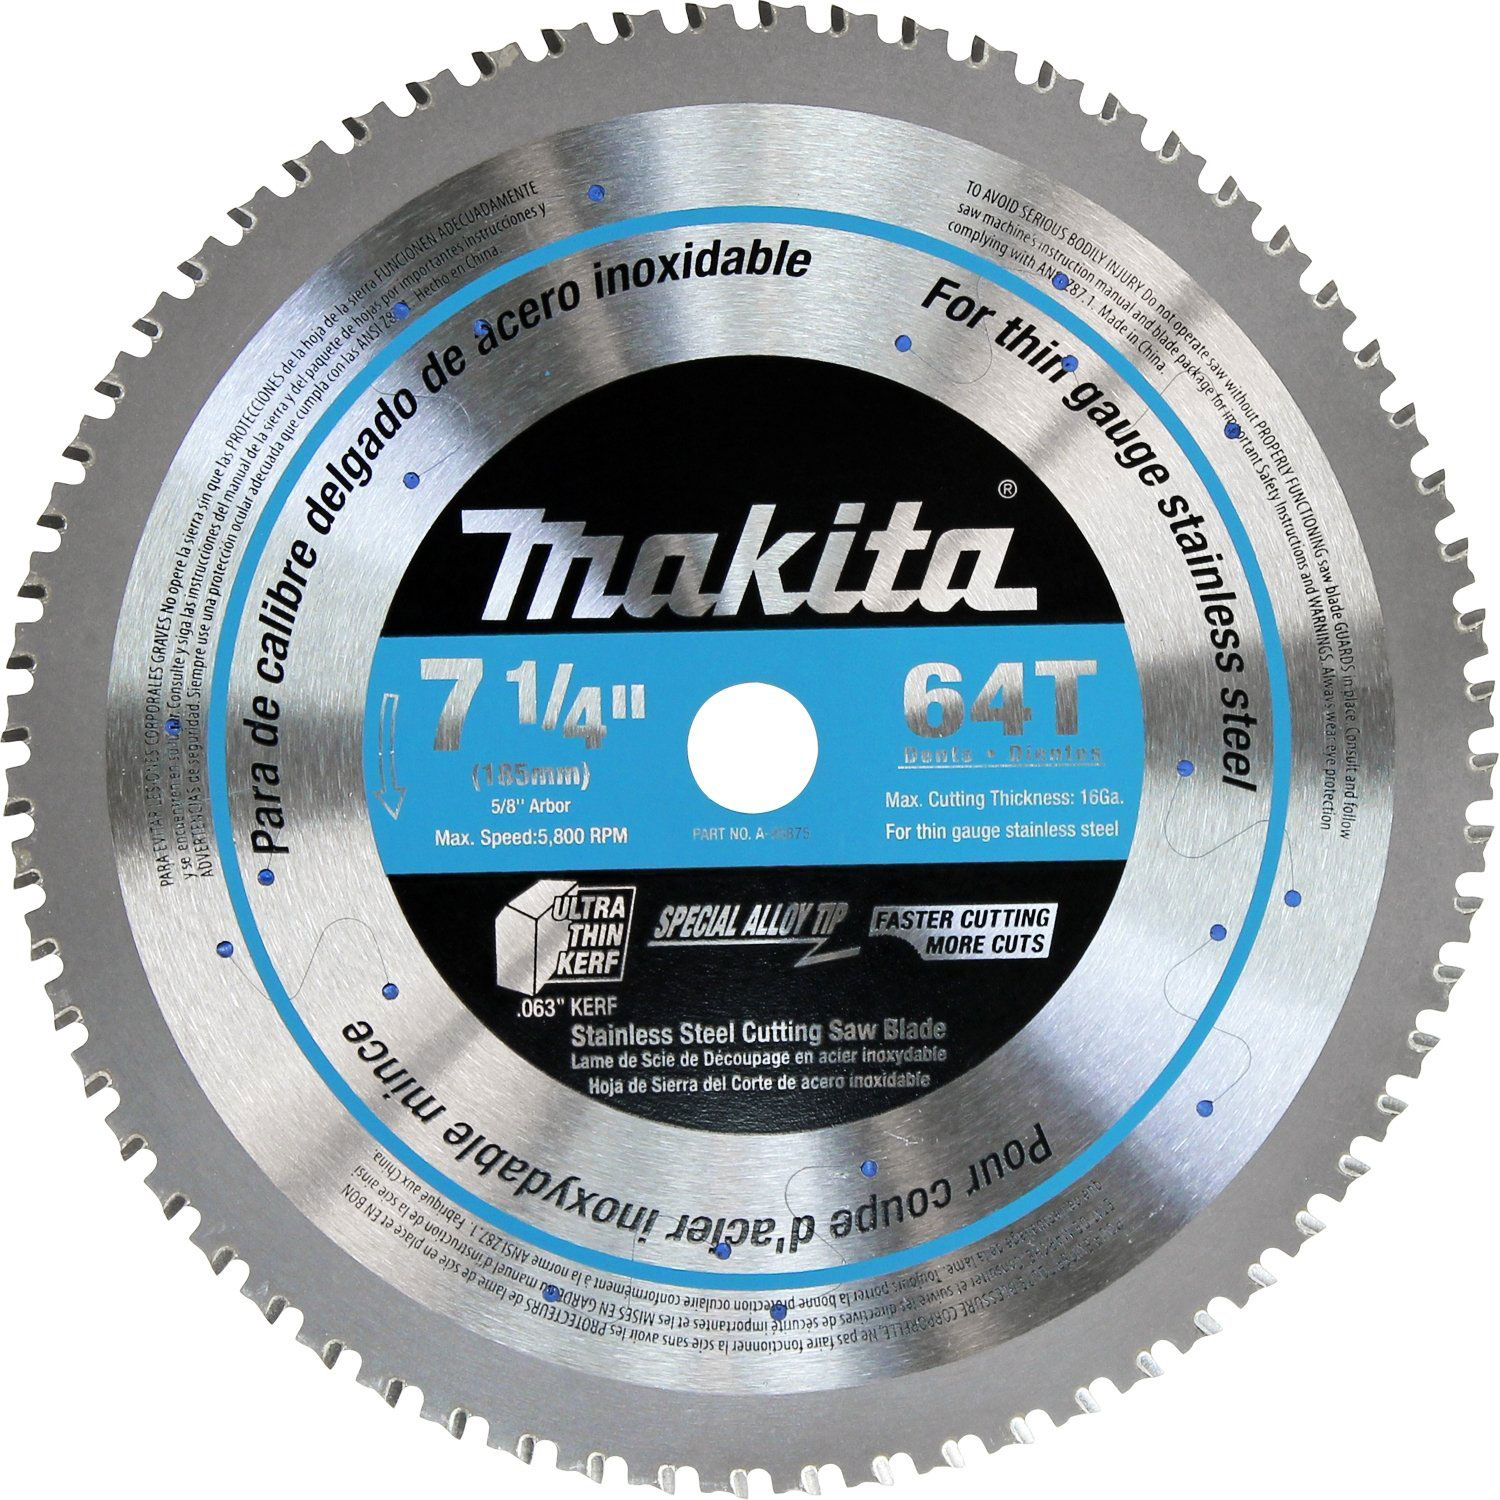 Makita A 95875 7 1 4 Inch 64t Stainless Steel Cutting Saw Blade 5 8